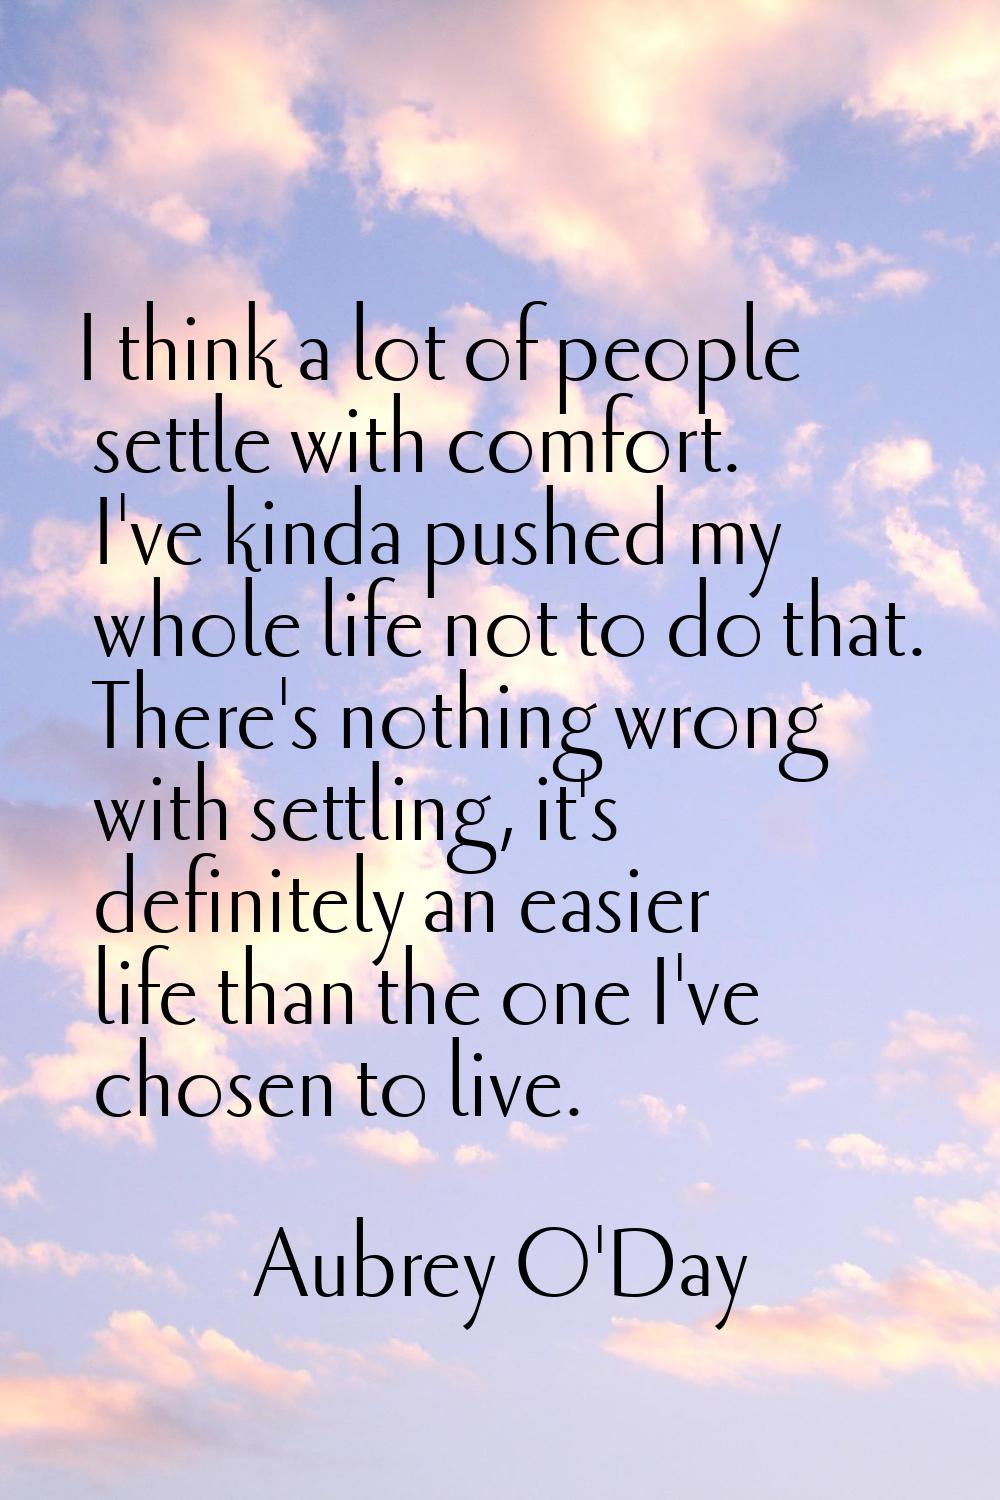 I think a lot of people settle with comfort. I've kinda pushed my whole life not to do that. There'